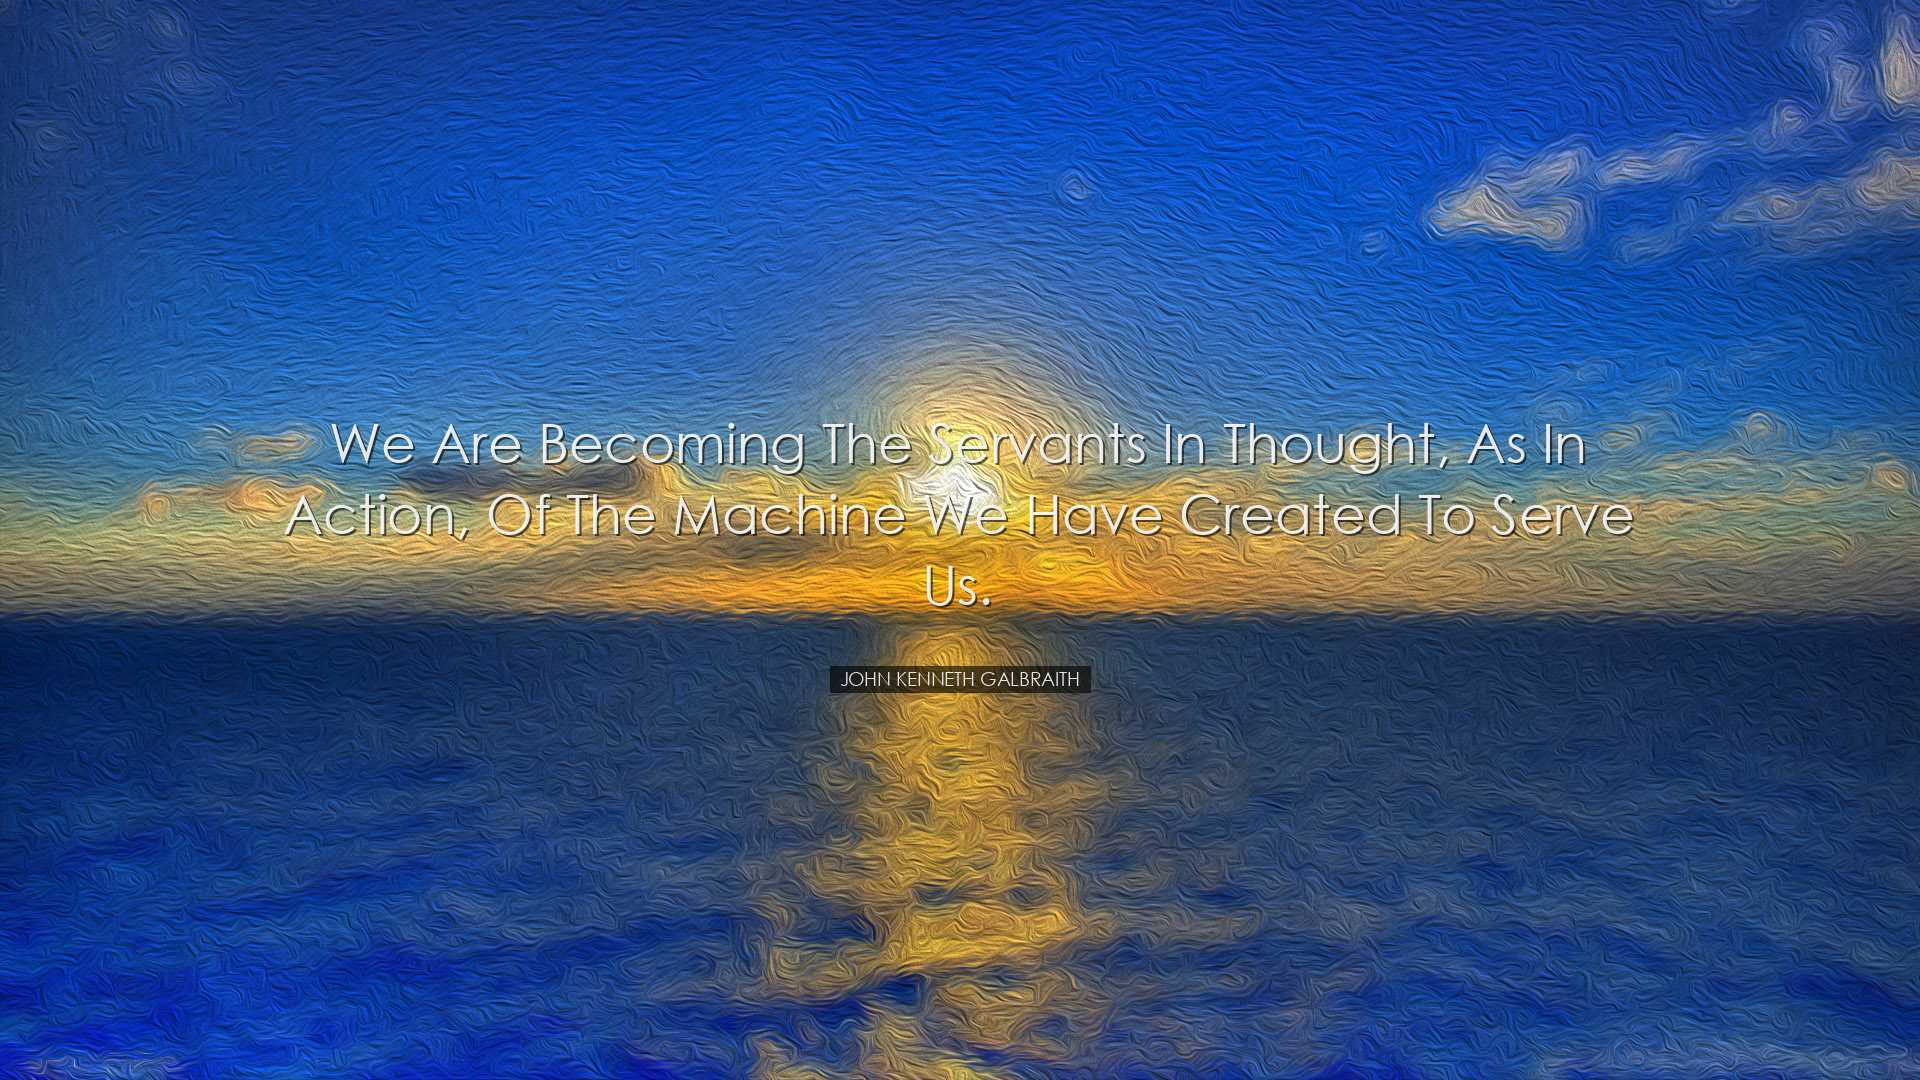 We are becoming the servants in thought, as in action, of the mach